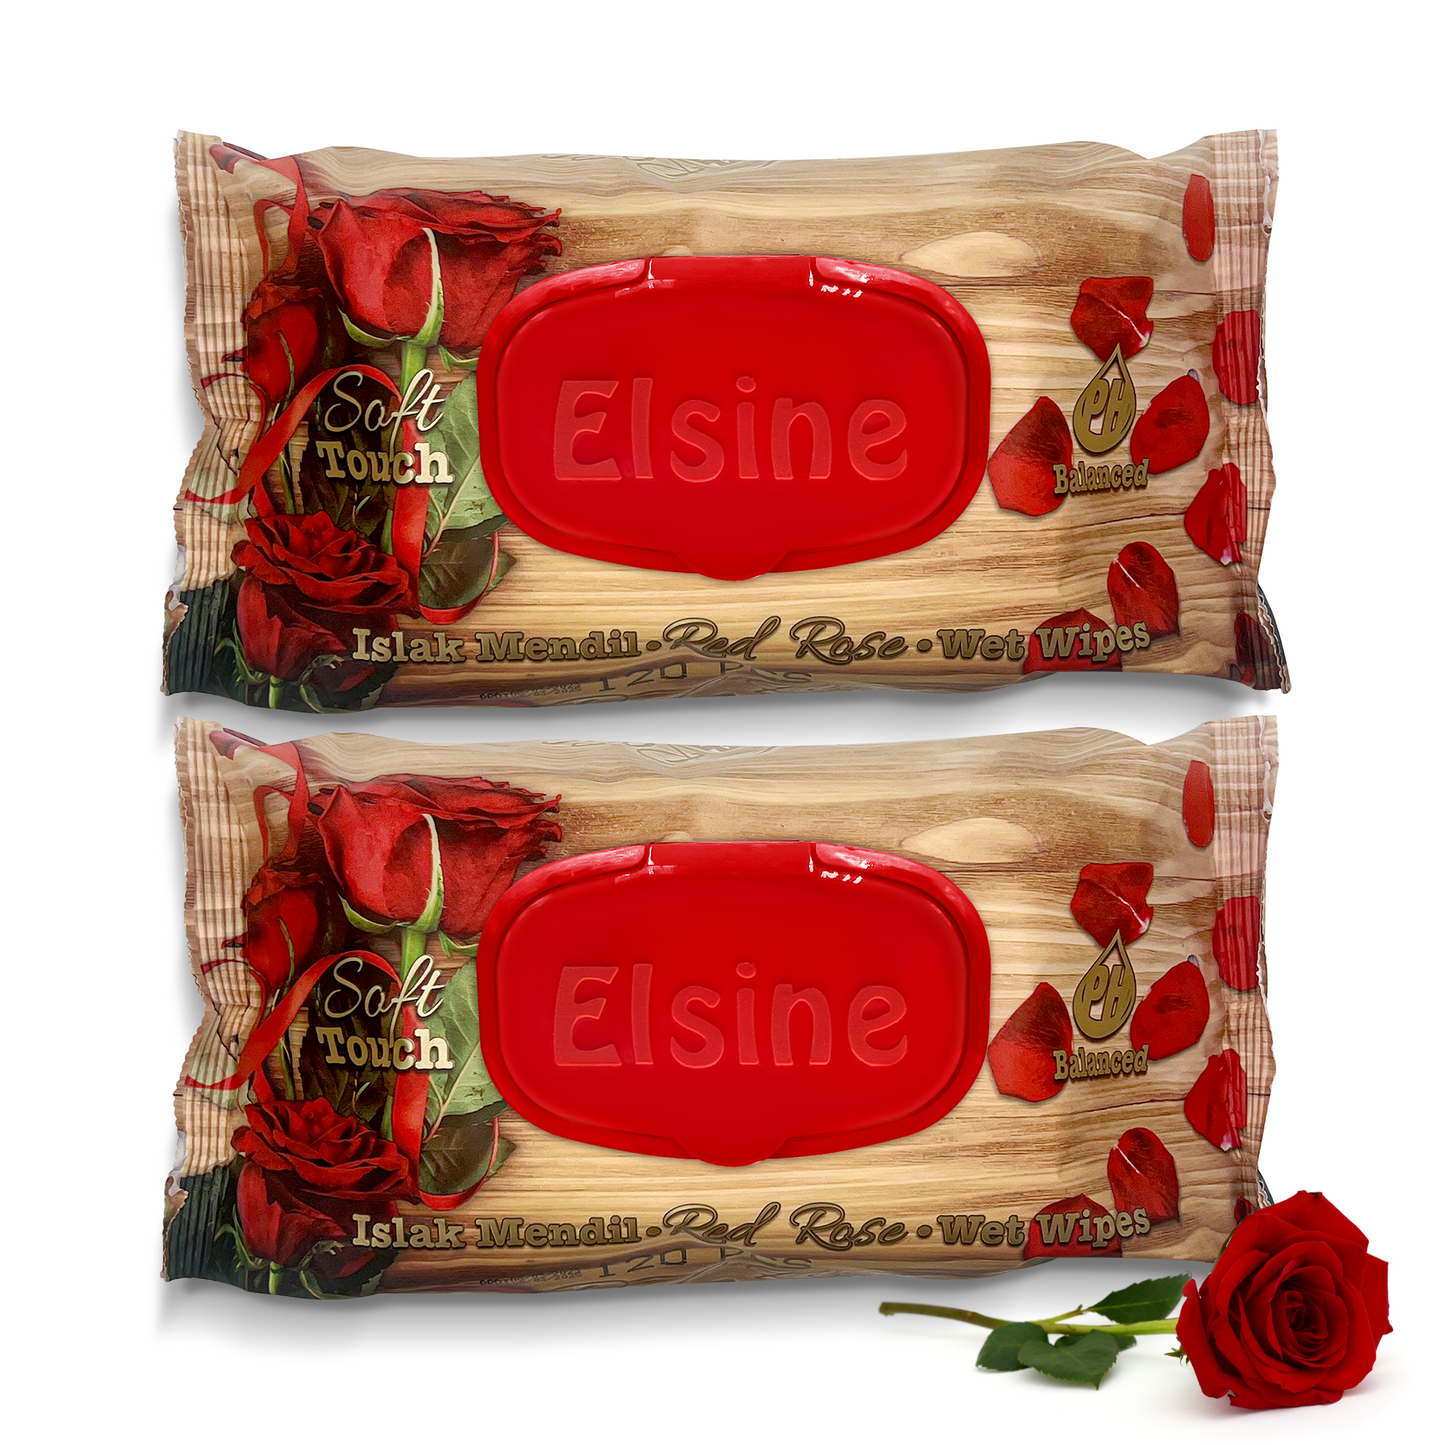 Red Rose Wet Wipes - 120 Sheets per Pack, Alcohol Free, Soft and Thick Waterwipes for Essential Personal Hygiene